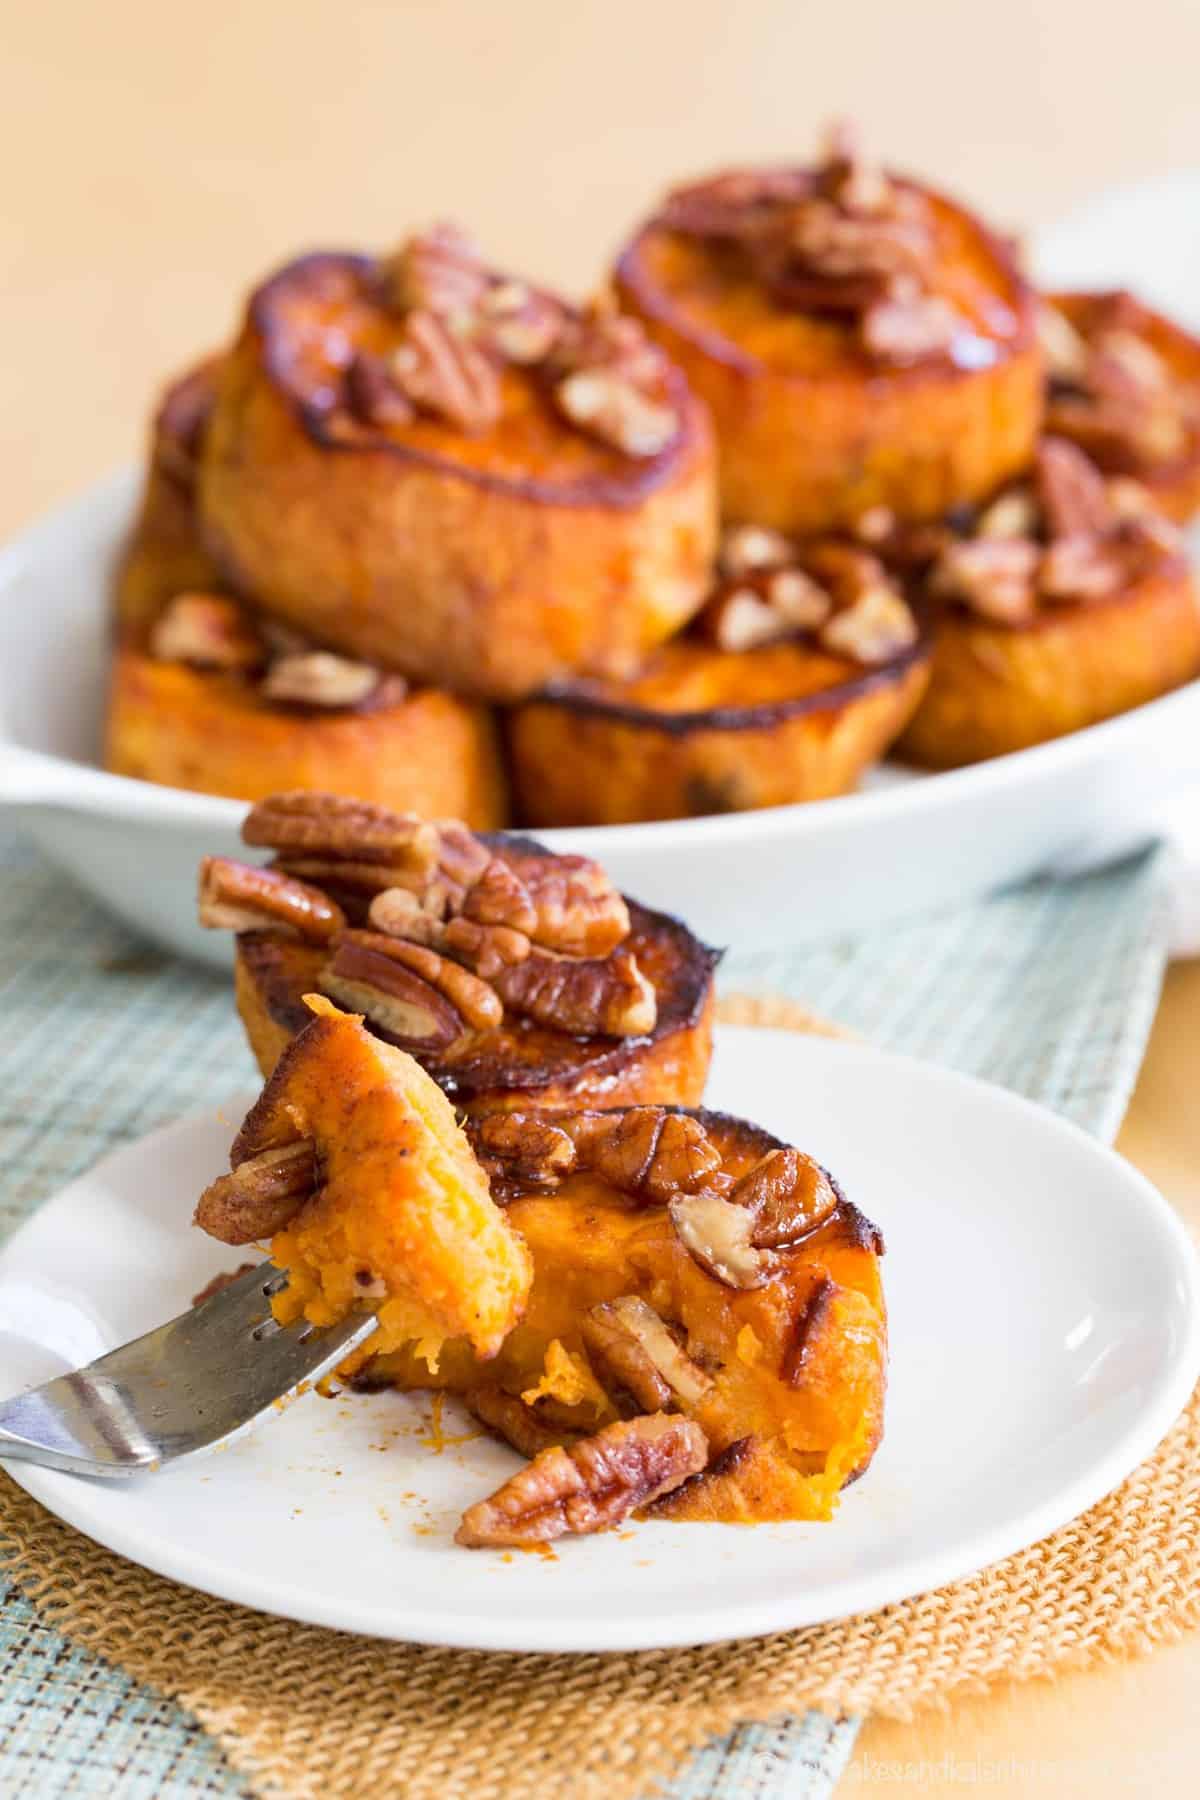 A forkful of sweet potato in the foreground with a dish of melting potatoes topped with pecans in the background